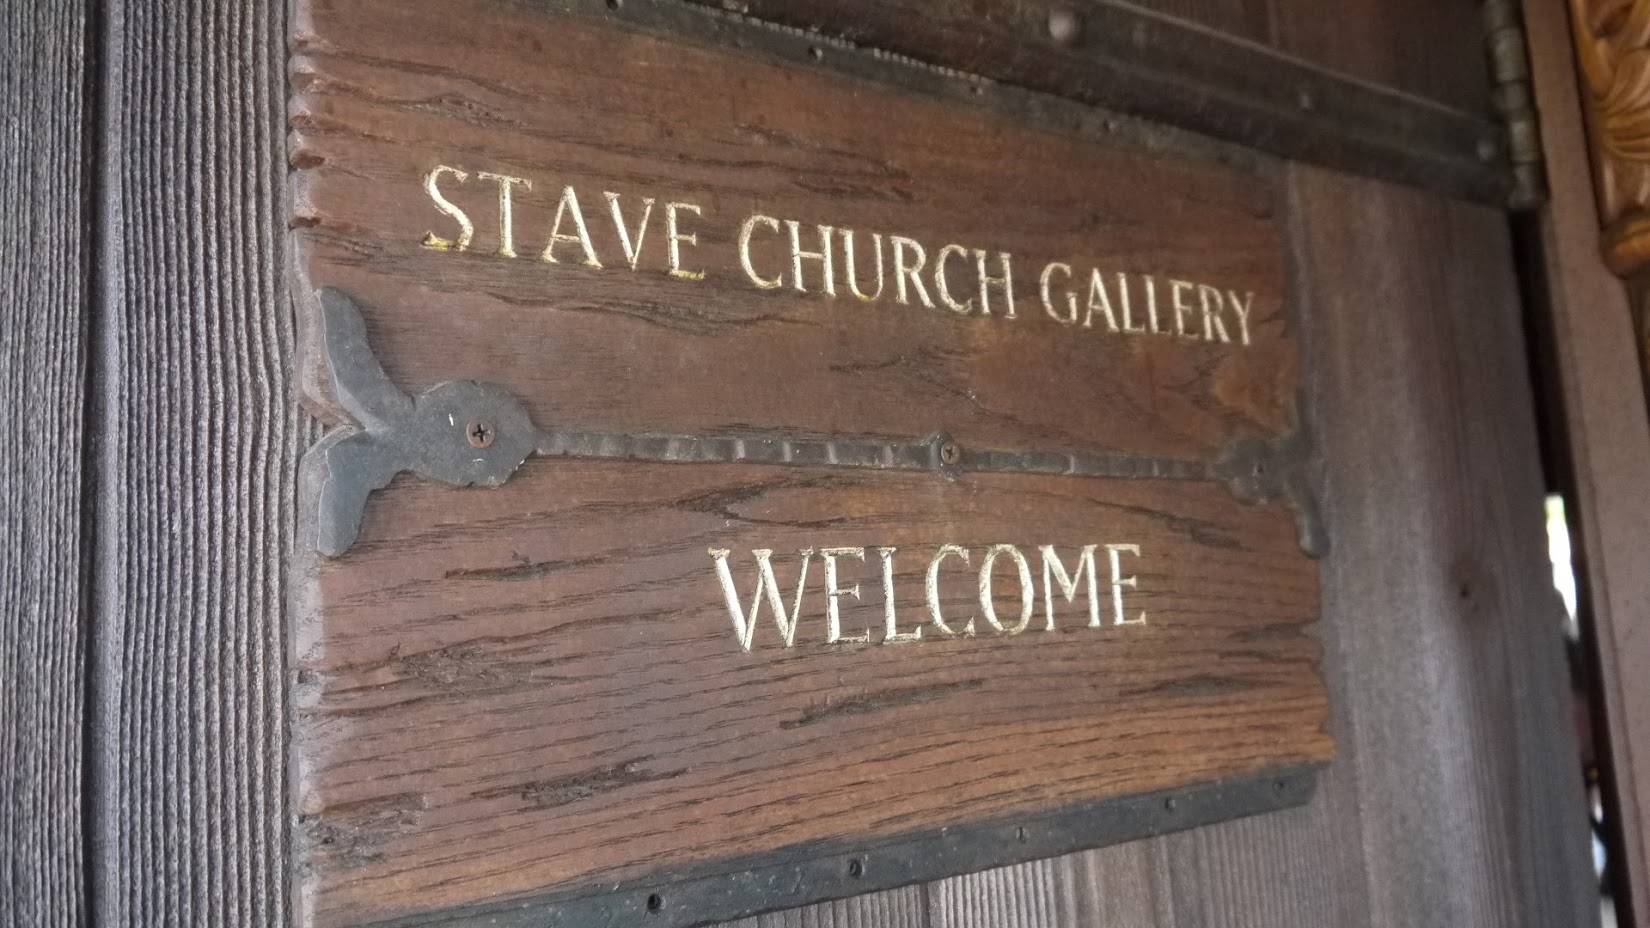 New Exhibit Coming To the Stave Church Gallery In the Norway Pavilion